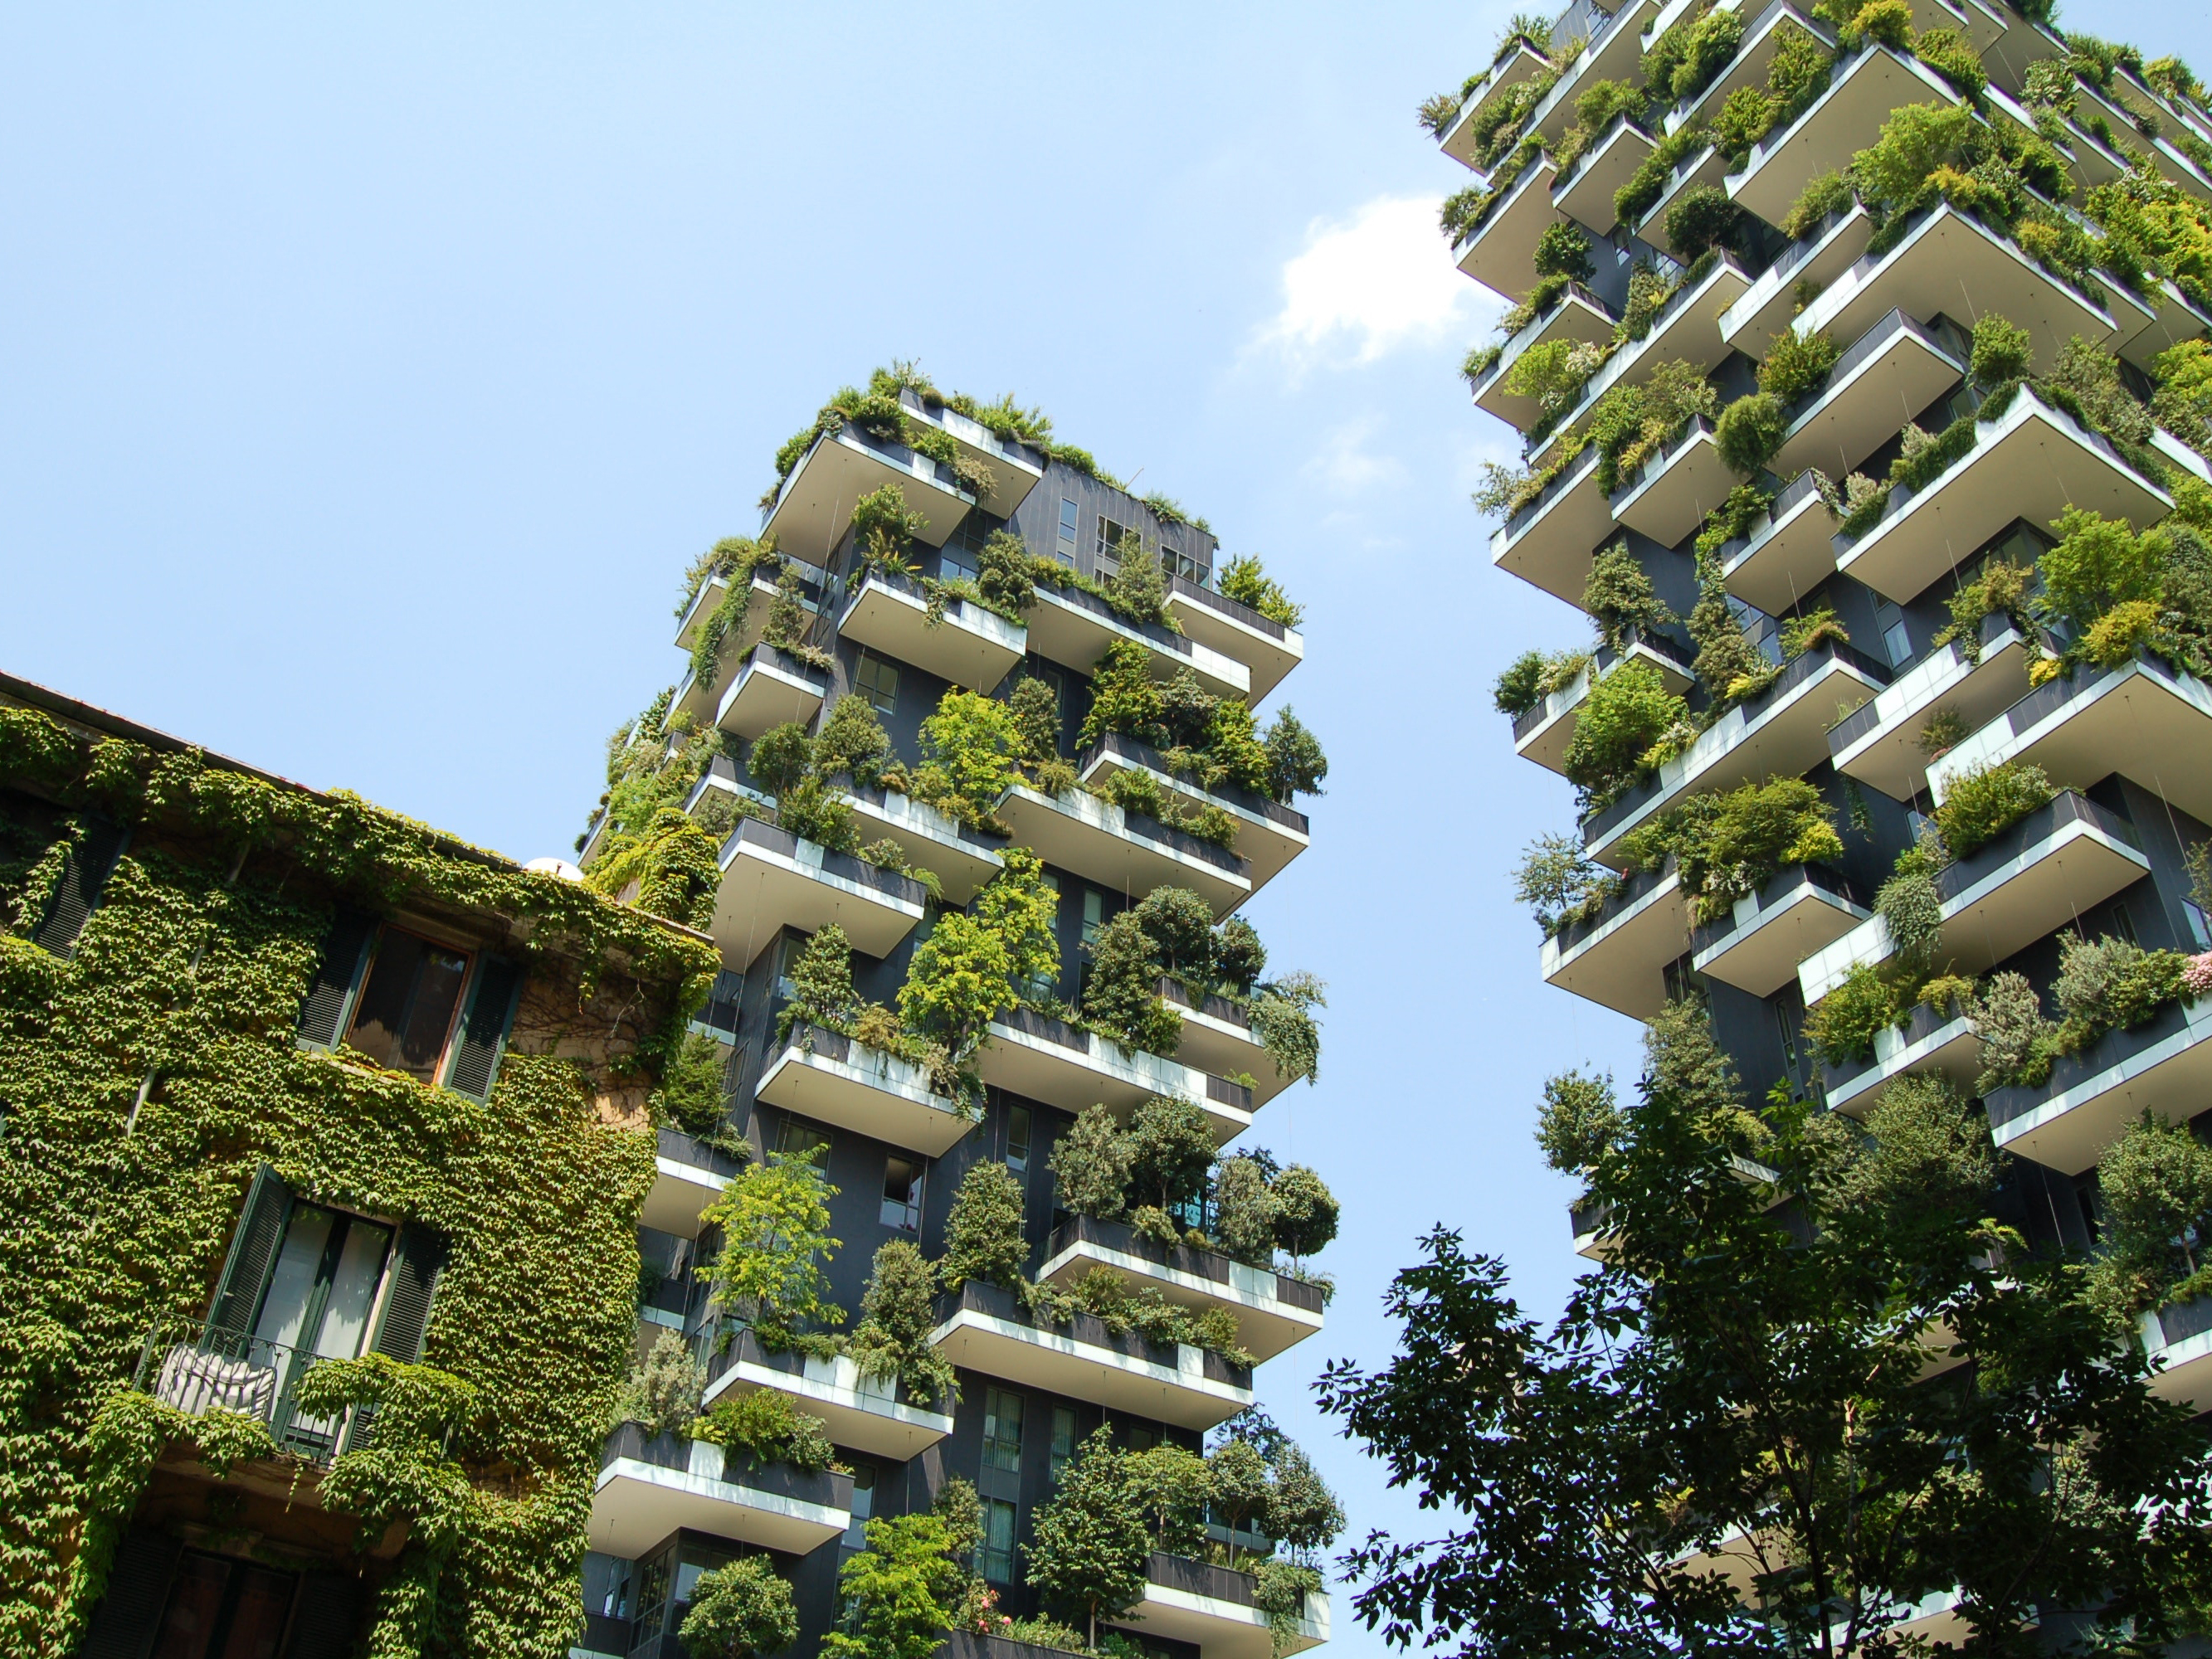 An image of sustainable apartment complex taken from Architecture & Design website